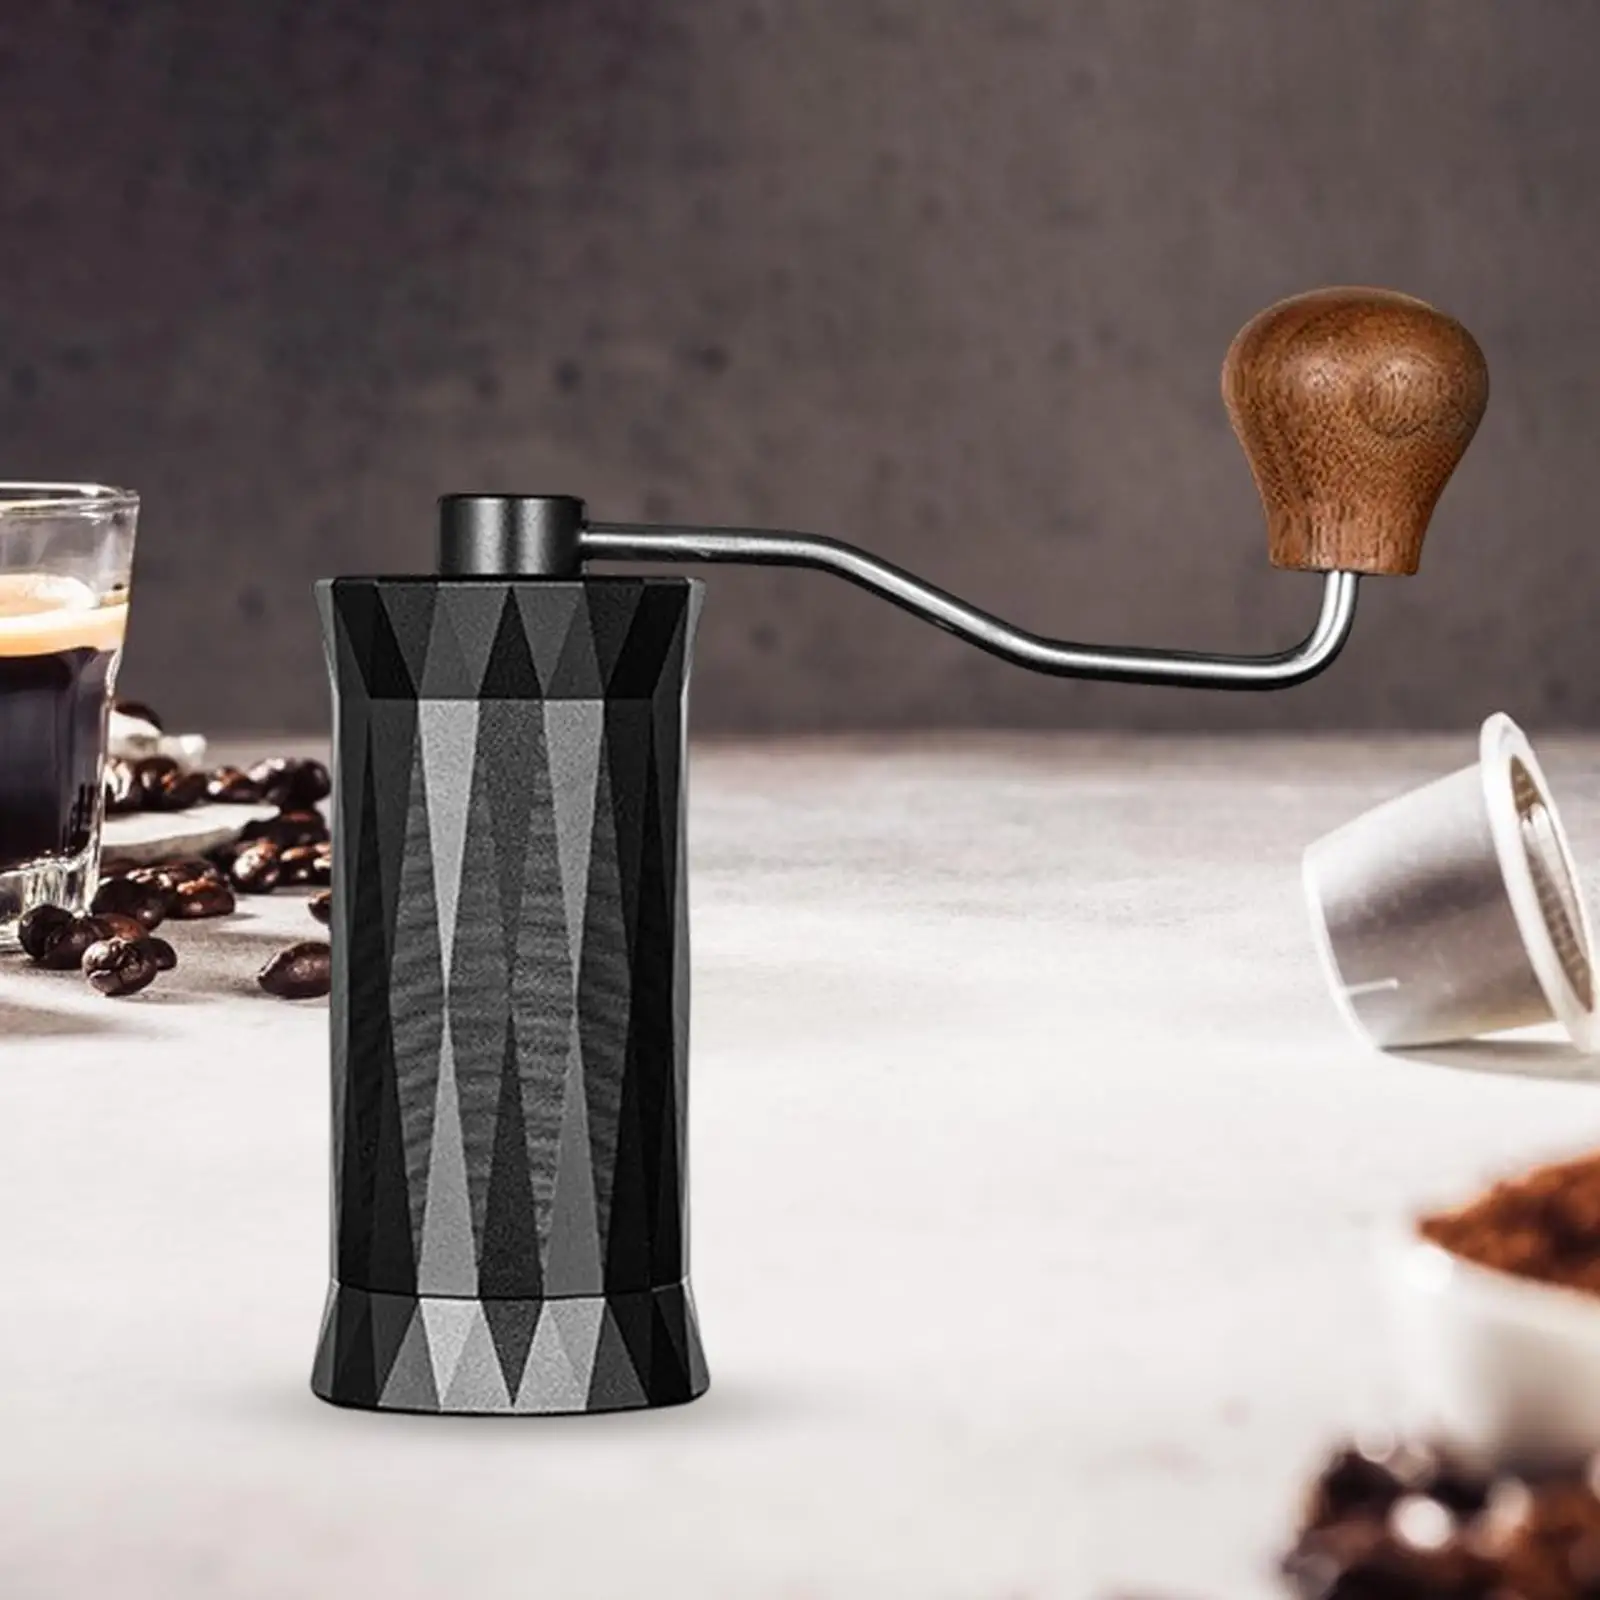 

Portable Manual Coffee Grinder Adjustable Knob Setting Conical Burr Mill Hand Coffee Mill for Bar Cafe Home Holiday Gifts